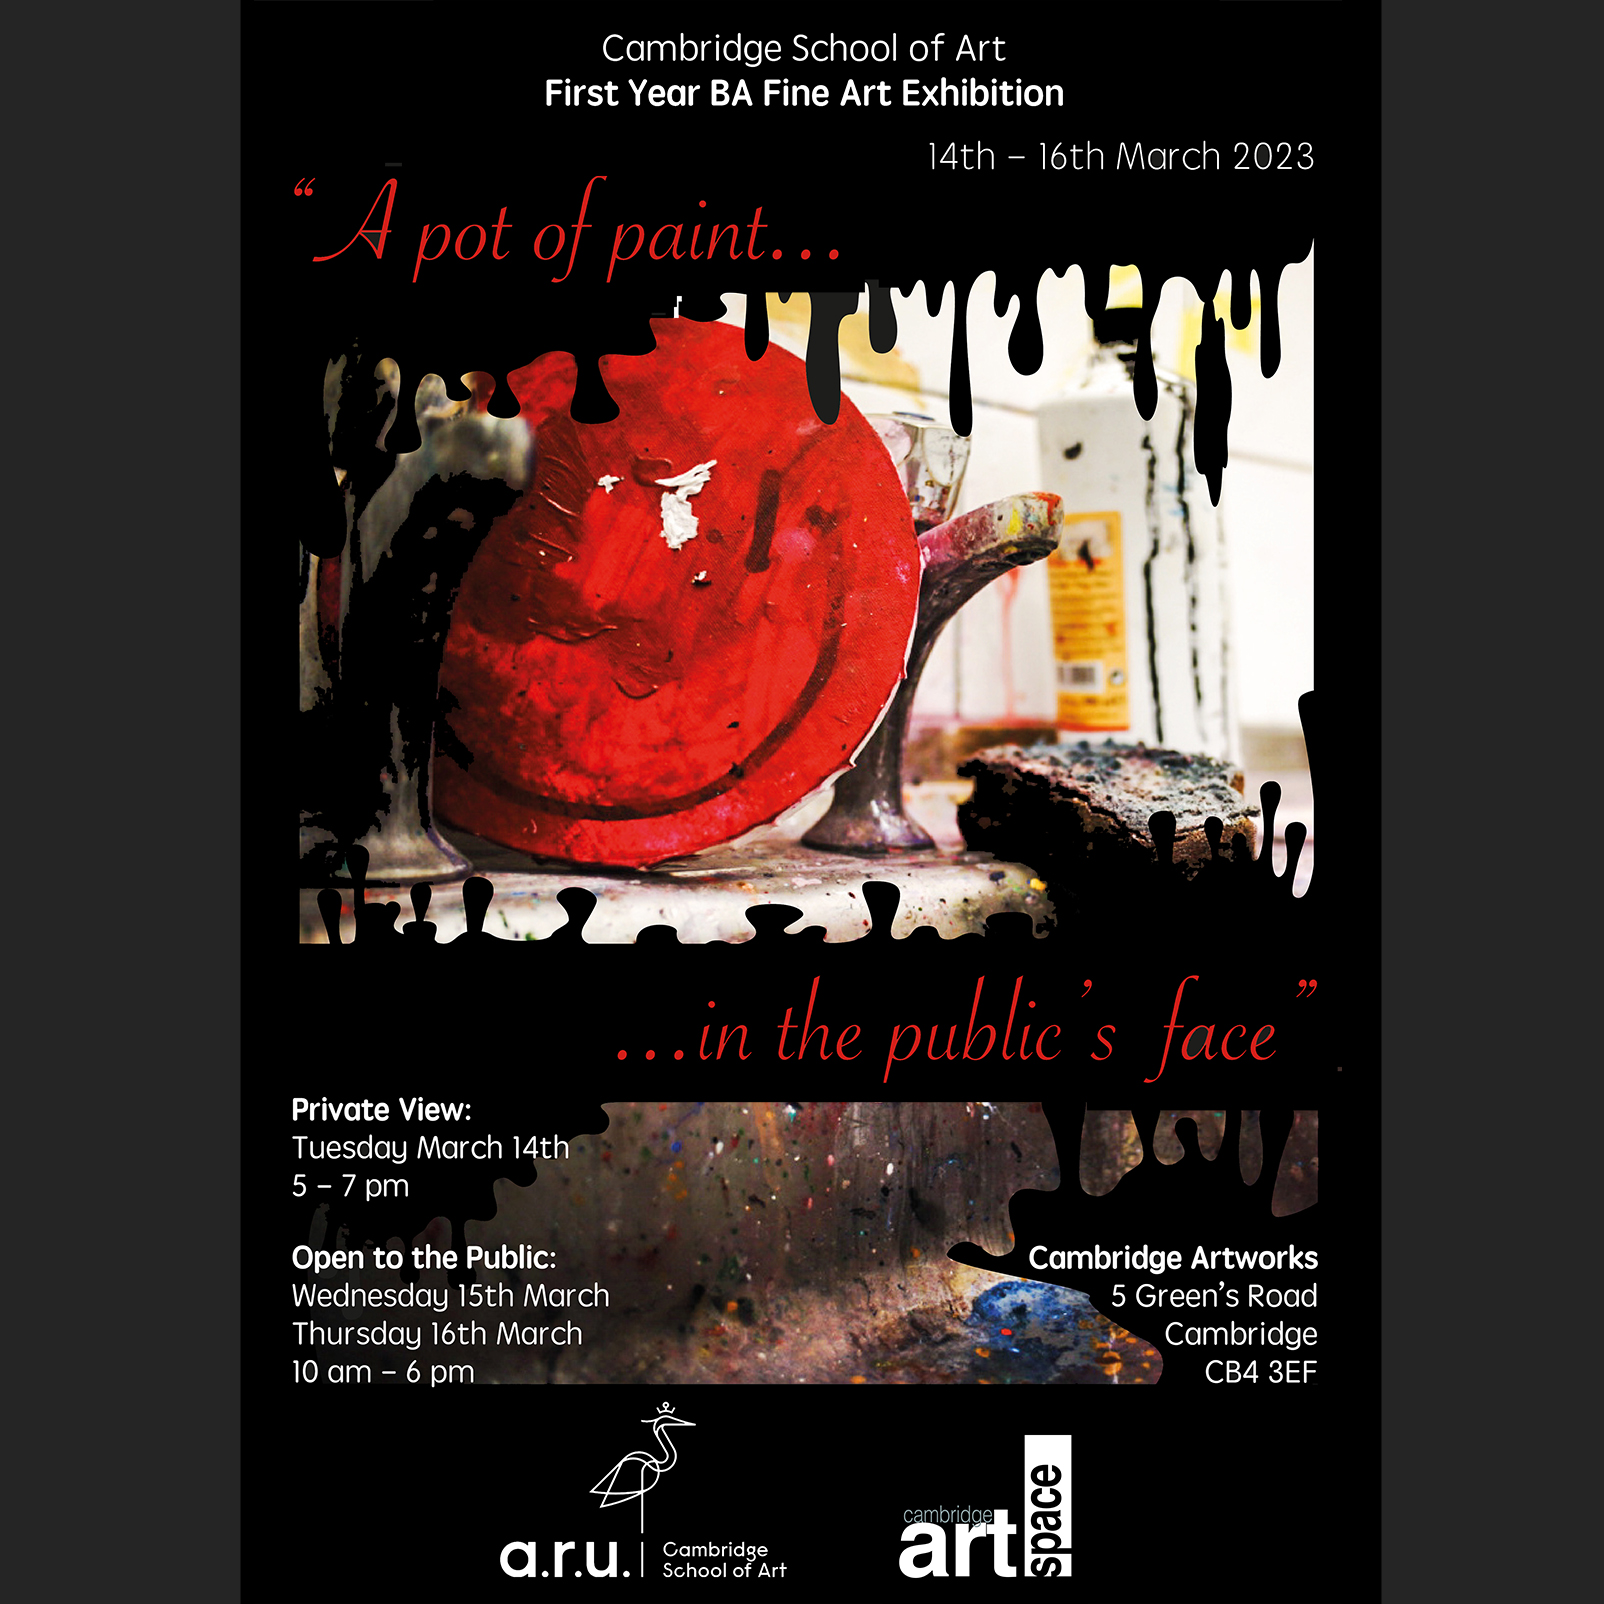 ‘A Pot of Paint in the Public’s Face’ exhibition exhibition poster.